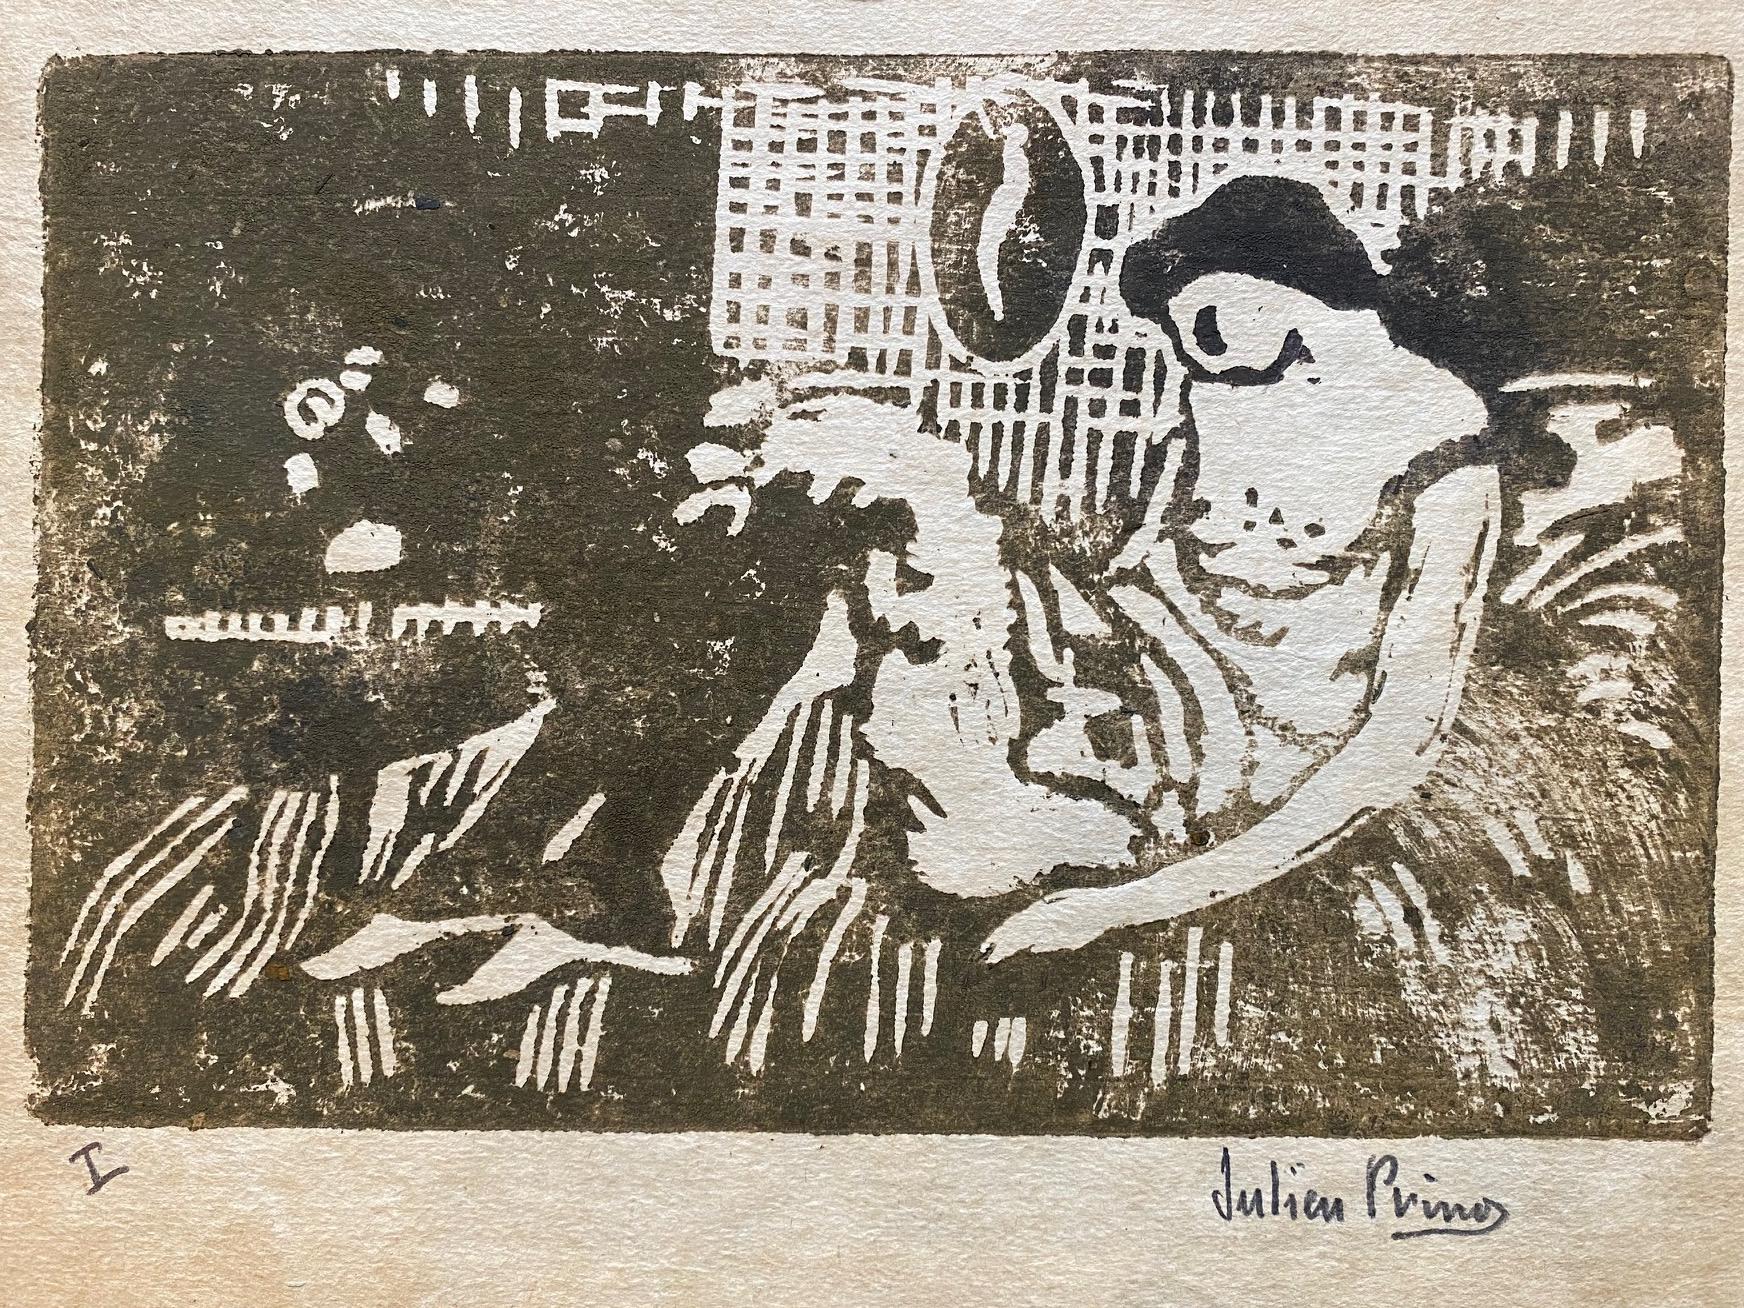 Reclining woman by Julien Prina - engraving on paper 18x24 cm